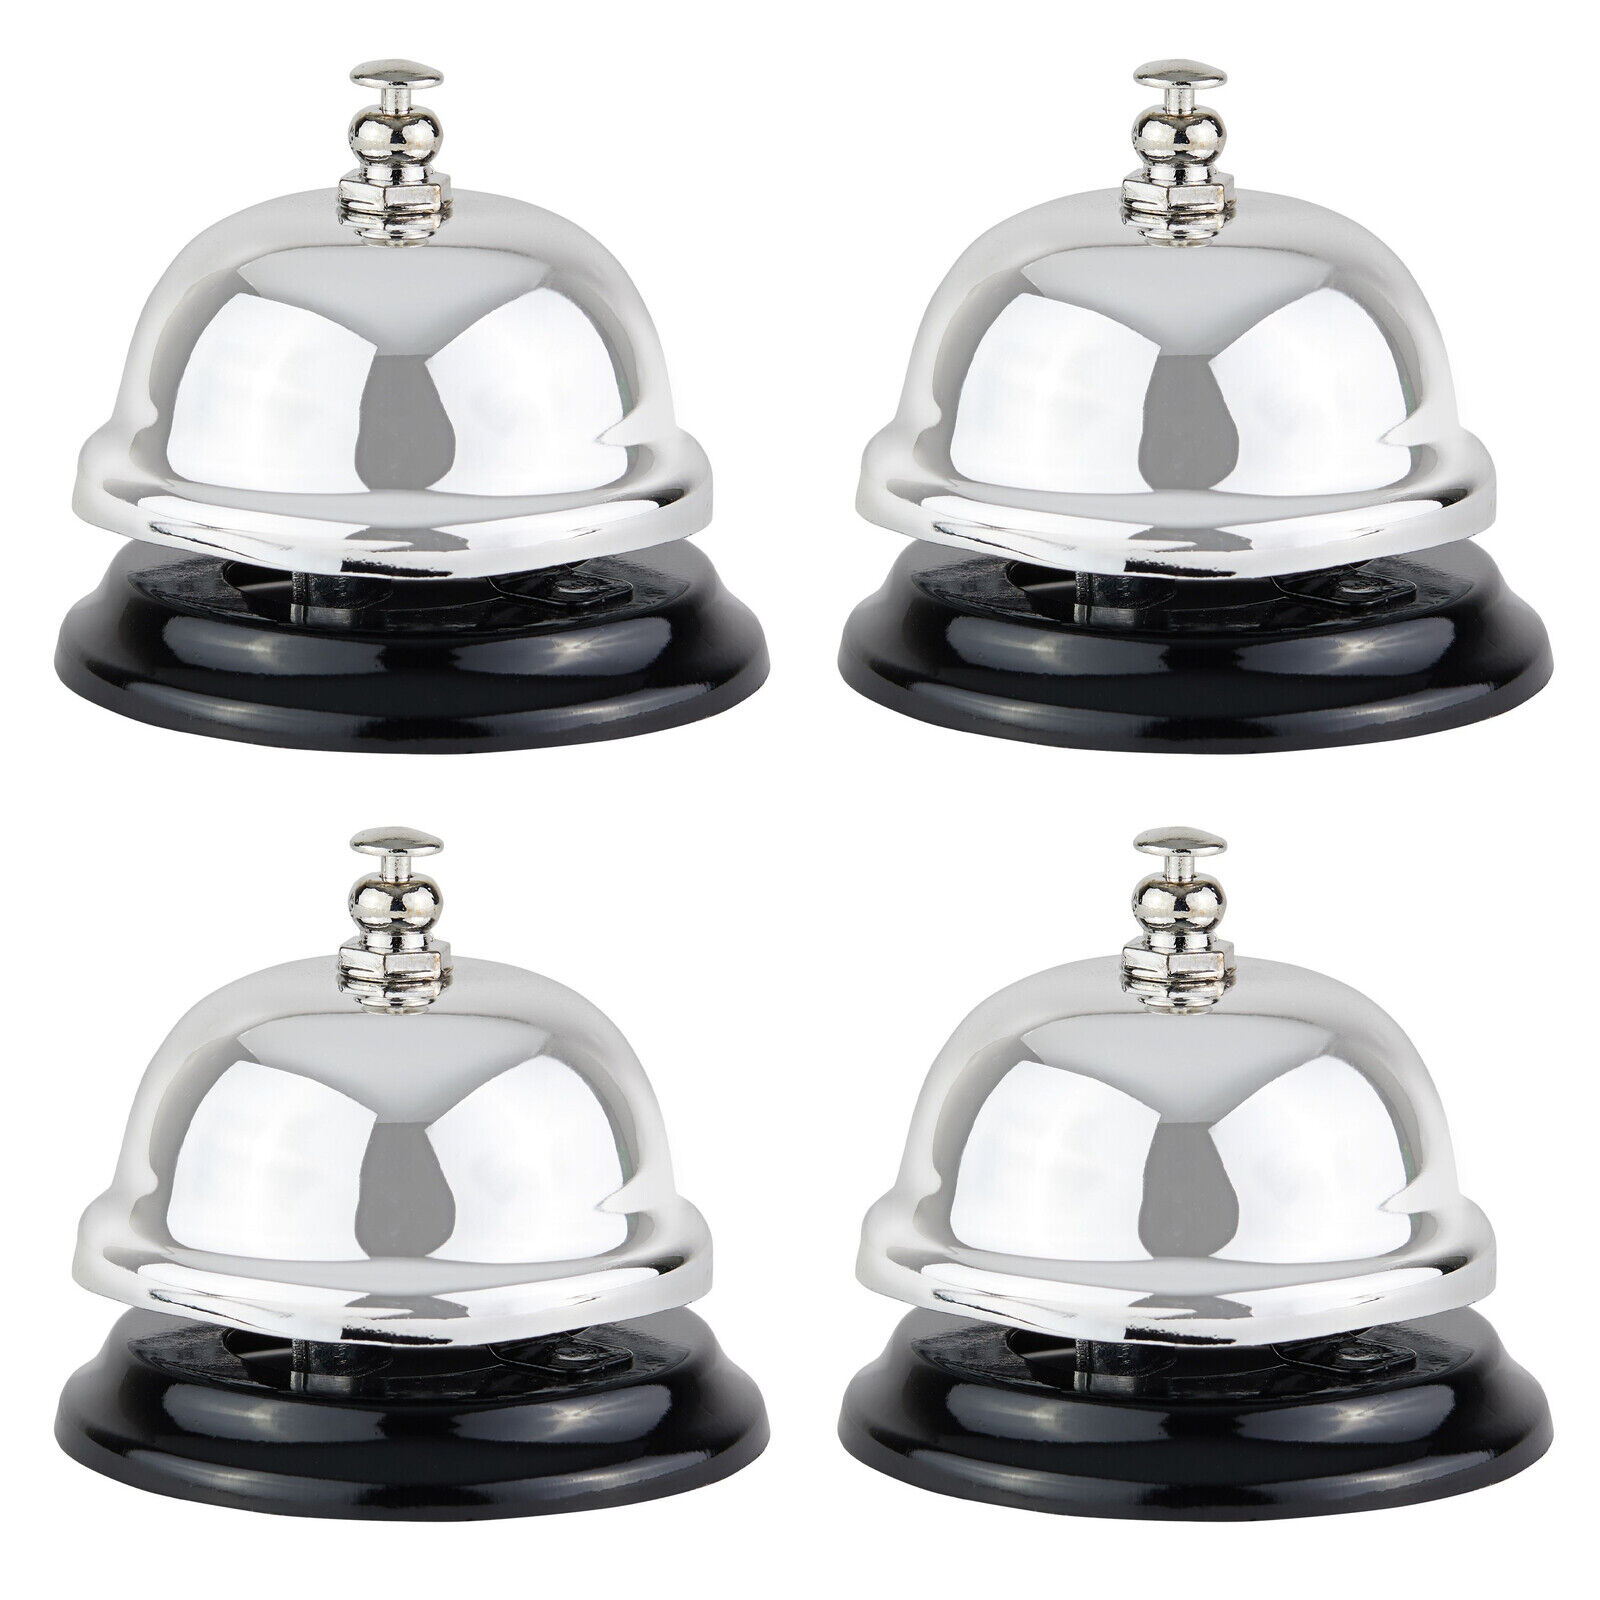 4-Pack Customer Service Bell for Desk, Hotels, Offices, Retail, Bellhops, 2.5 In